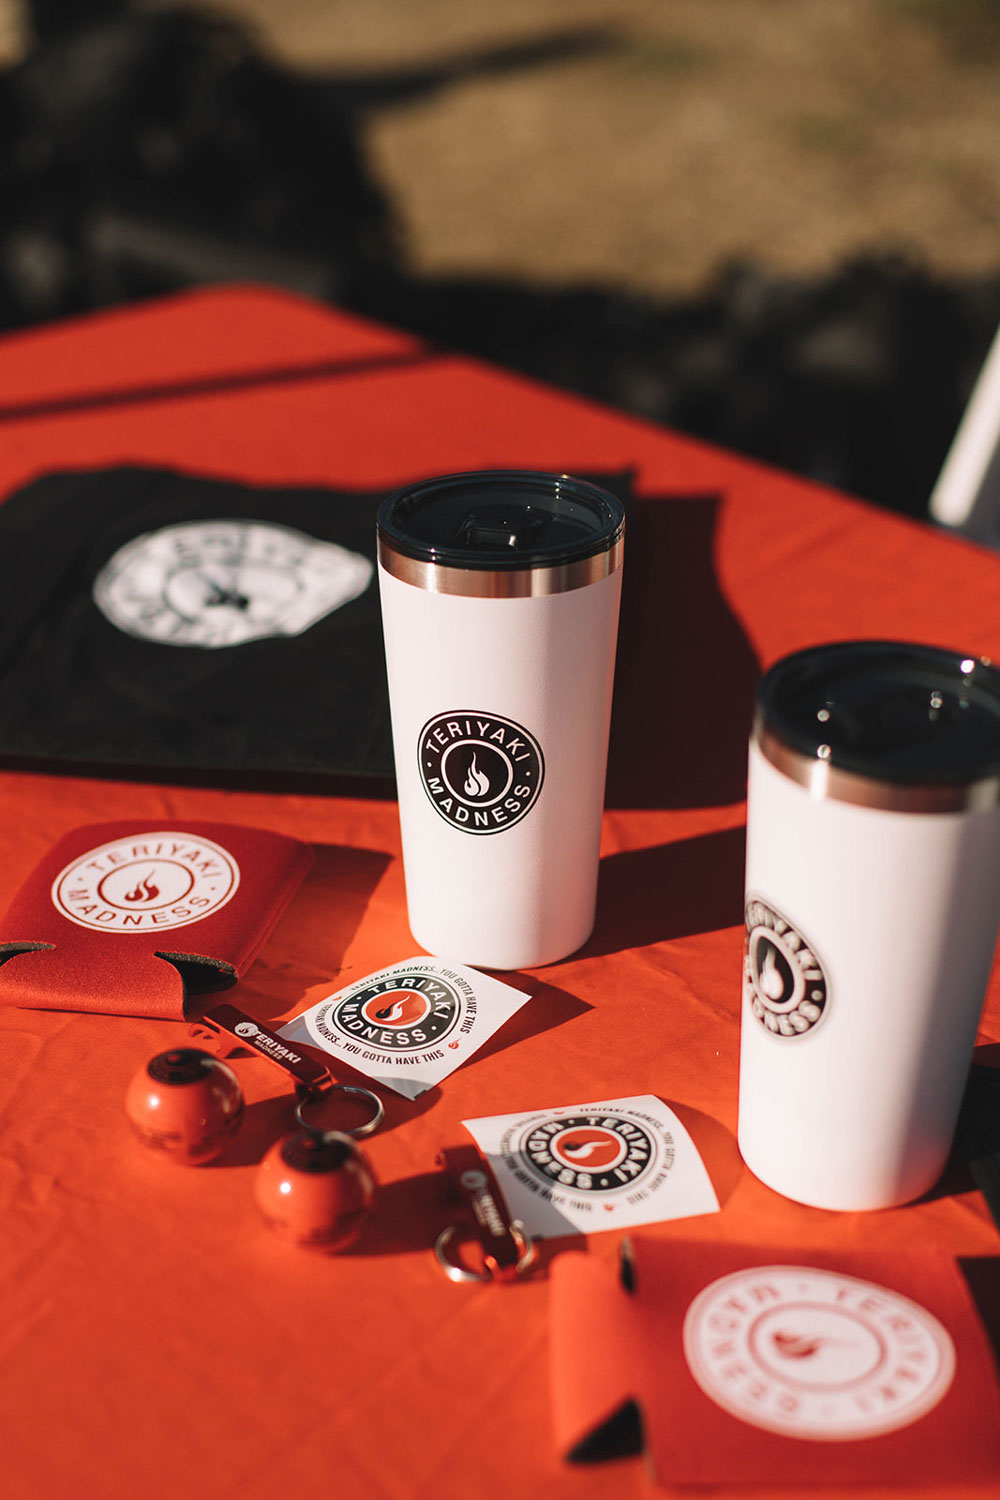 Teriyaki Madness promotional items, coffee tumblers, stickers, and t-shirts